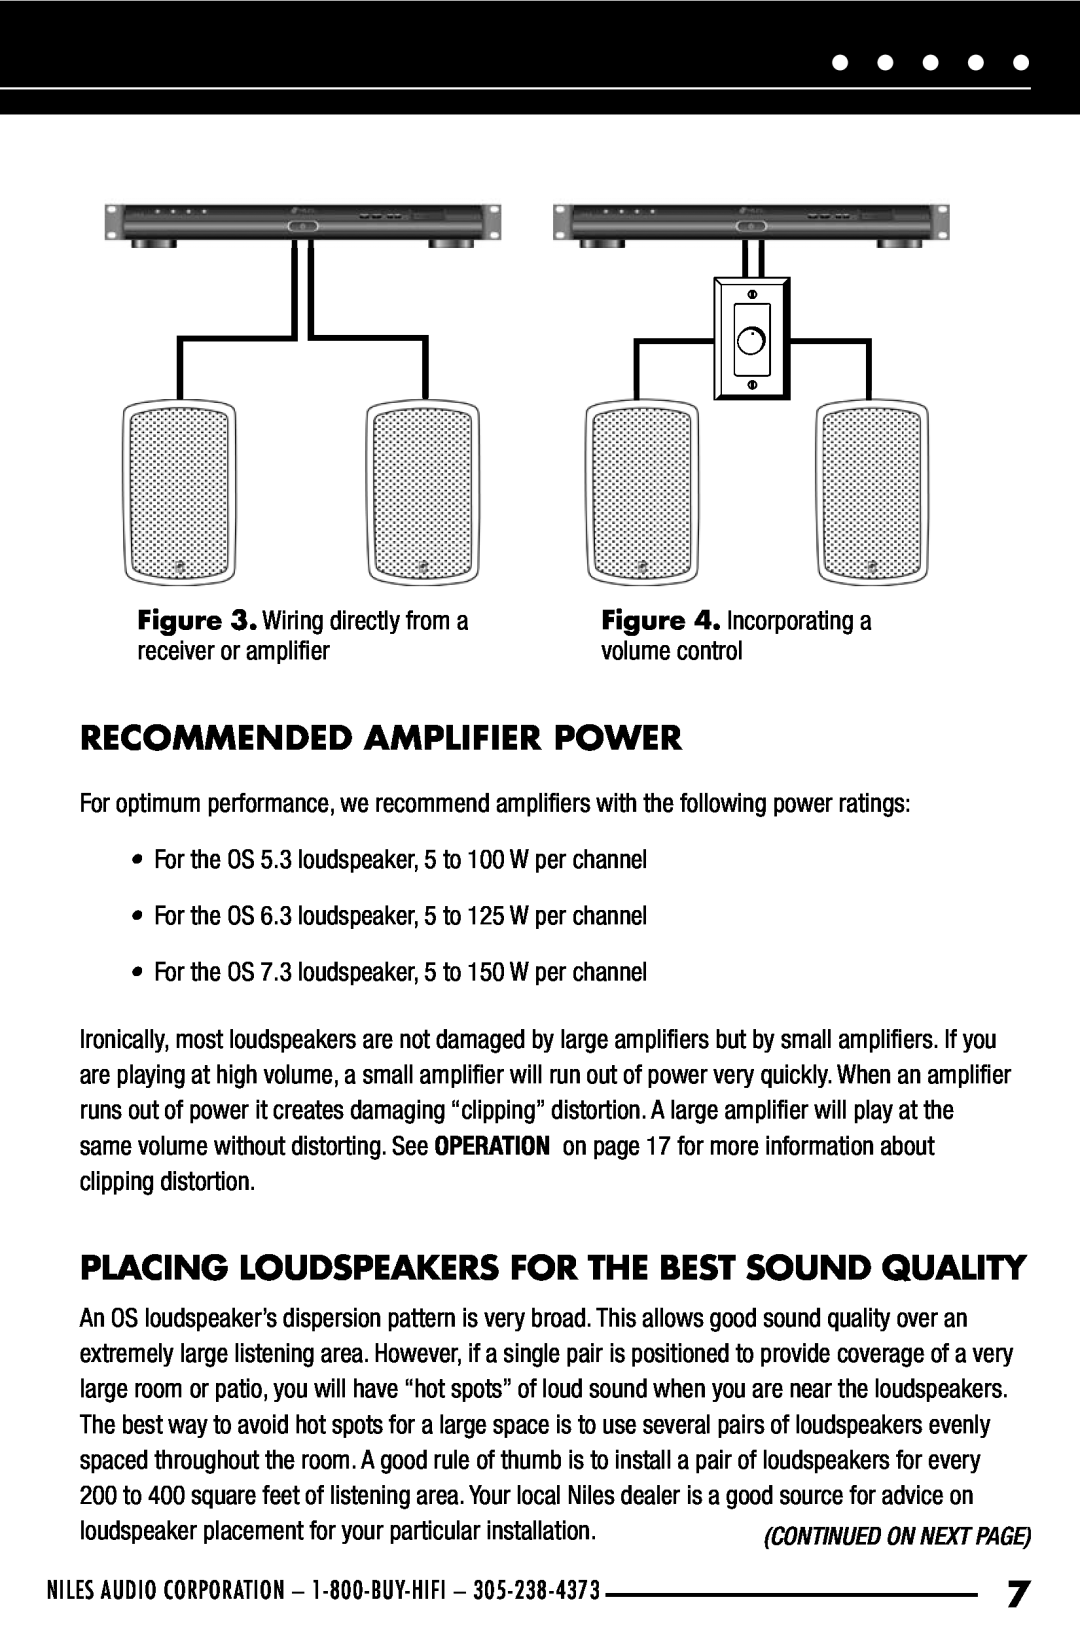 Niles Audio OS5.3 Recommended Amplifier Power, Placing Loudspeakers for the Best Sound Quality, Wiring directly from a 